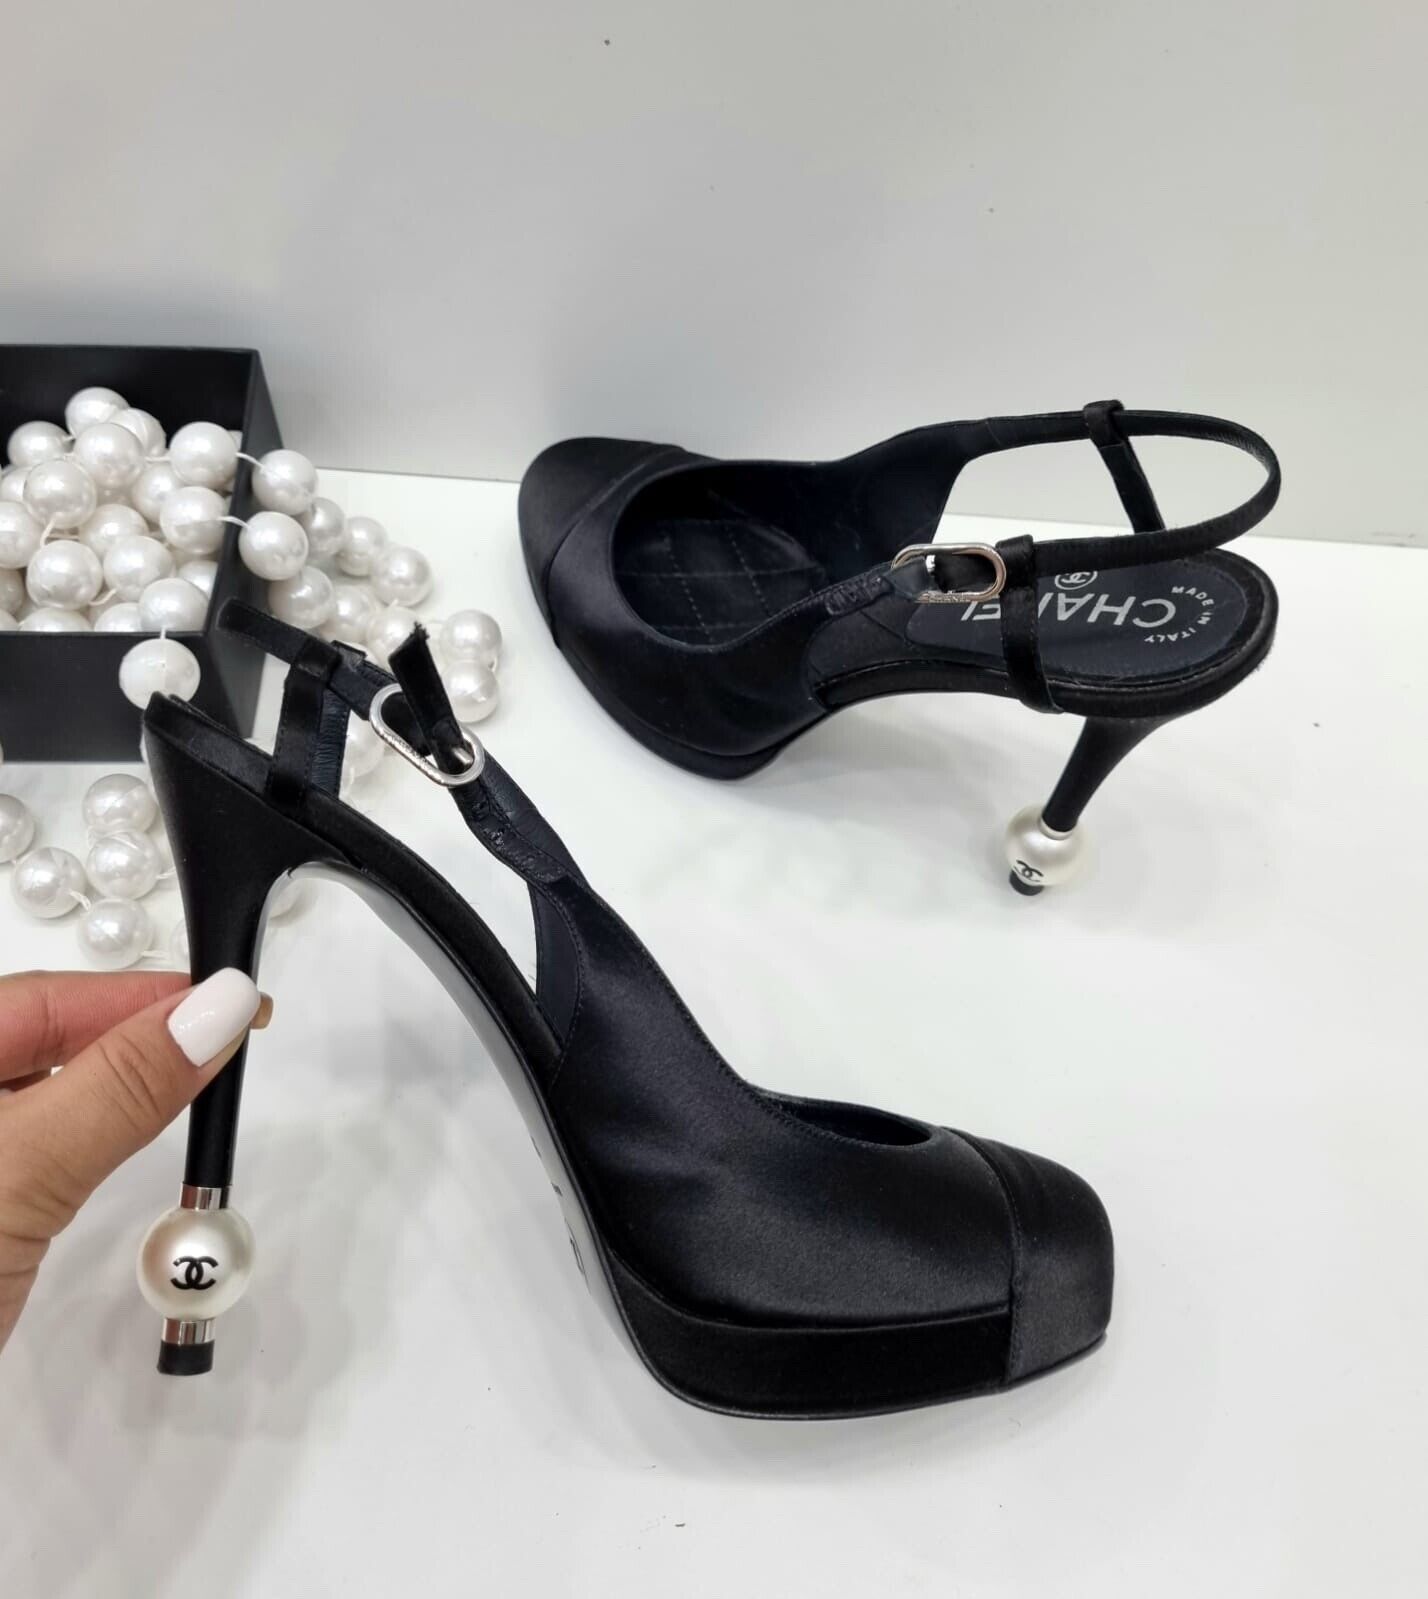 Chanel heels with pearls 39/5 | eBay